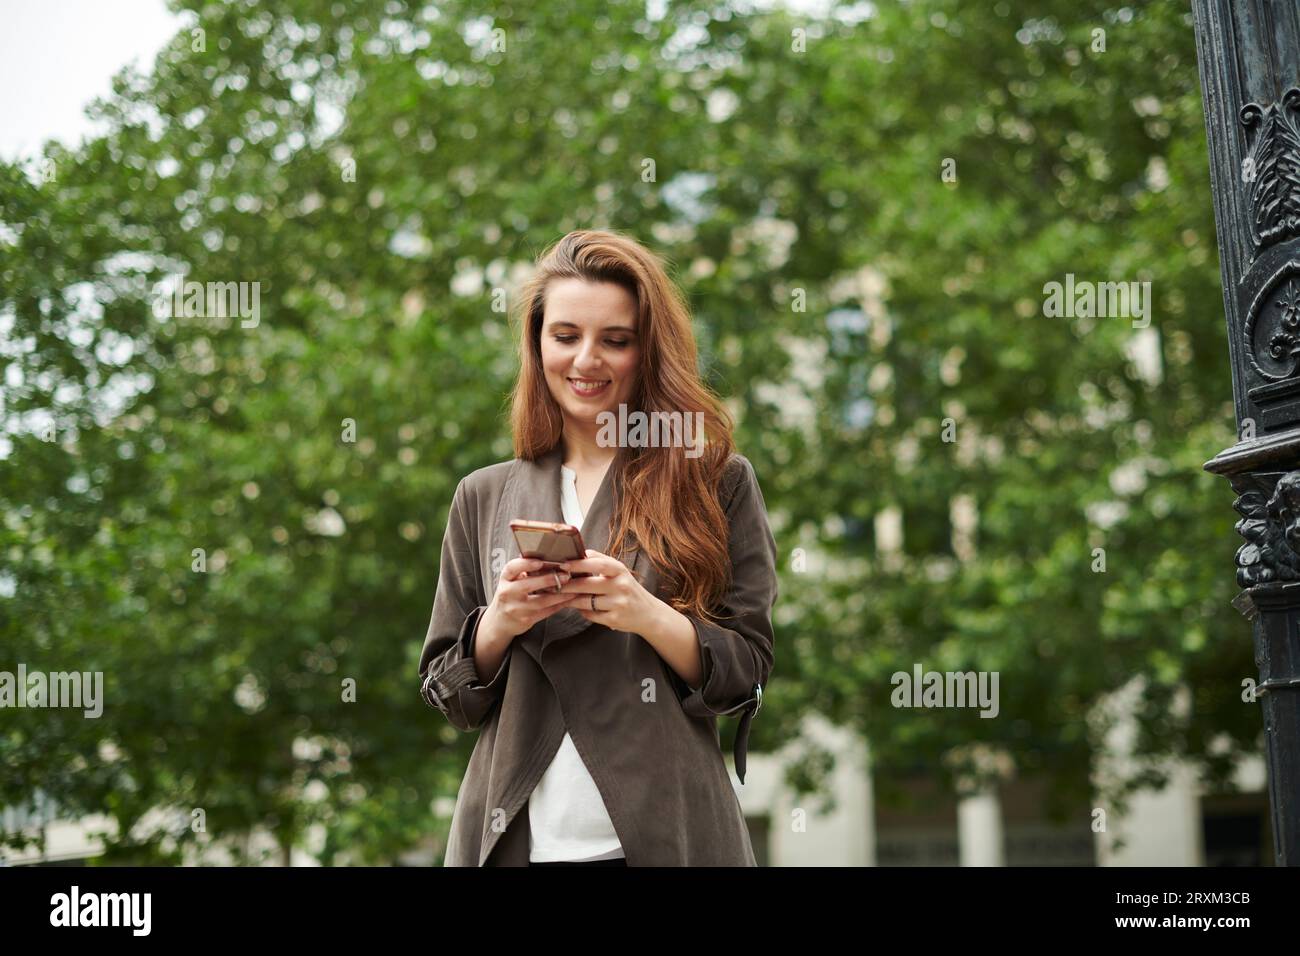 Mid adult woman smiling while texting on smart phone Stock Photo